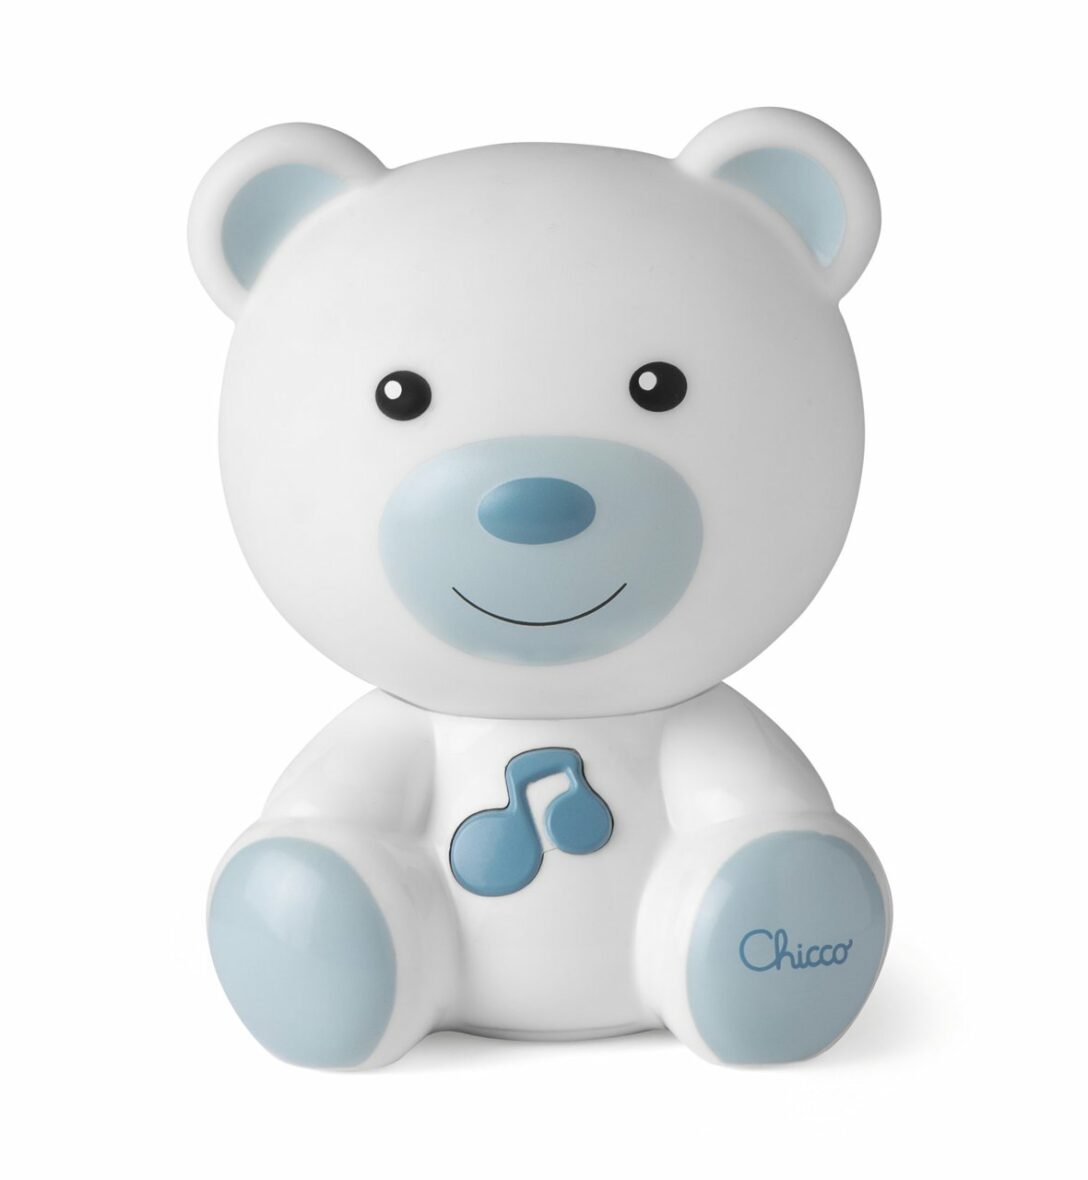 Veilleuse Musicale chicco Dreamlight..